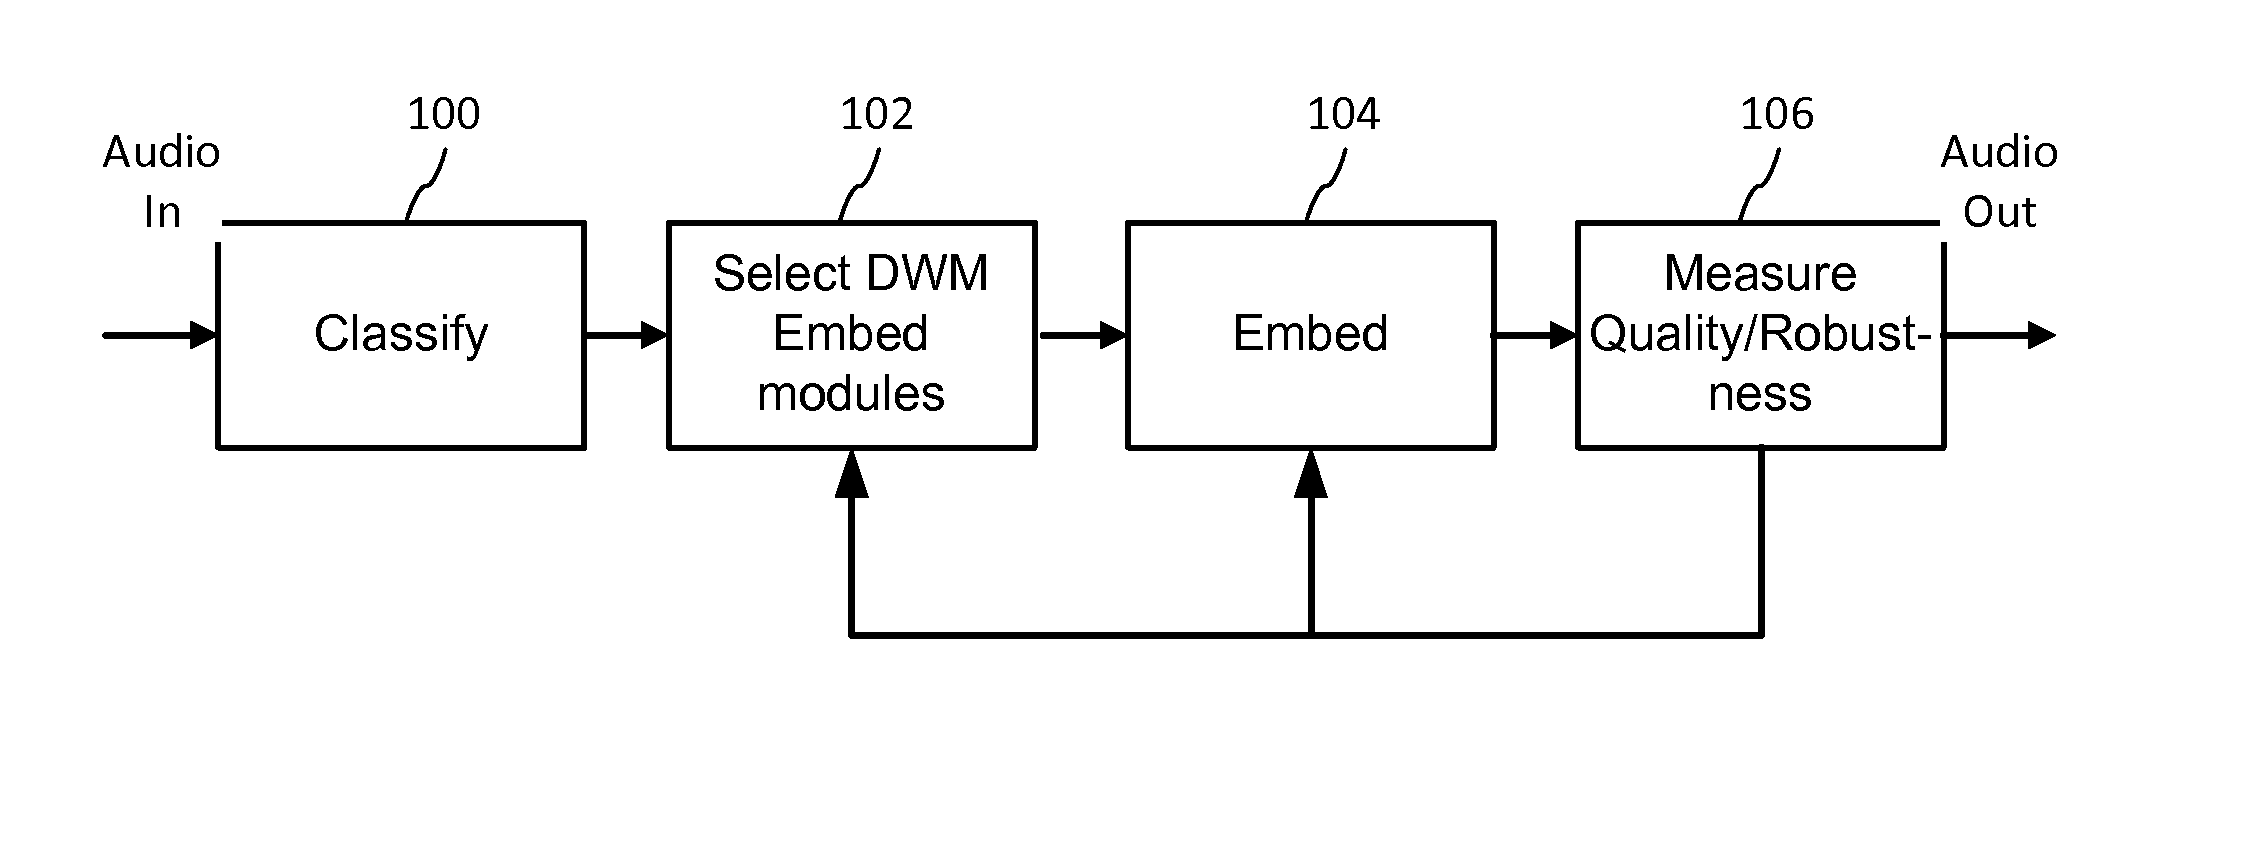 Multi-mode audio recognition and auxiliary data encoding and decoding